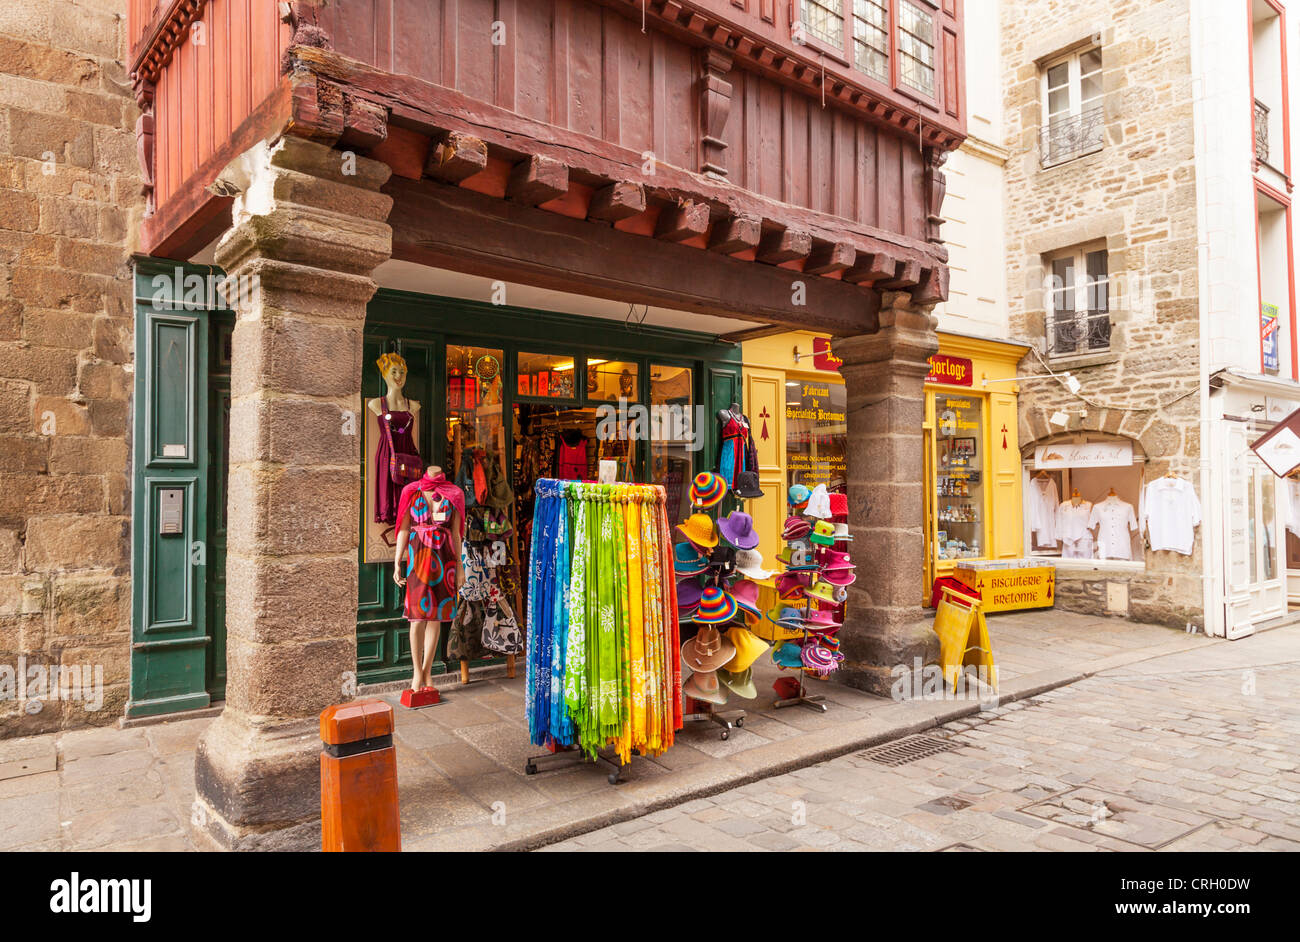 Shop in Dinan, Brittany, France, with an outdoor display of hats and scarves. Stock Photo